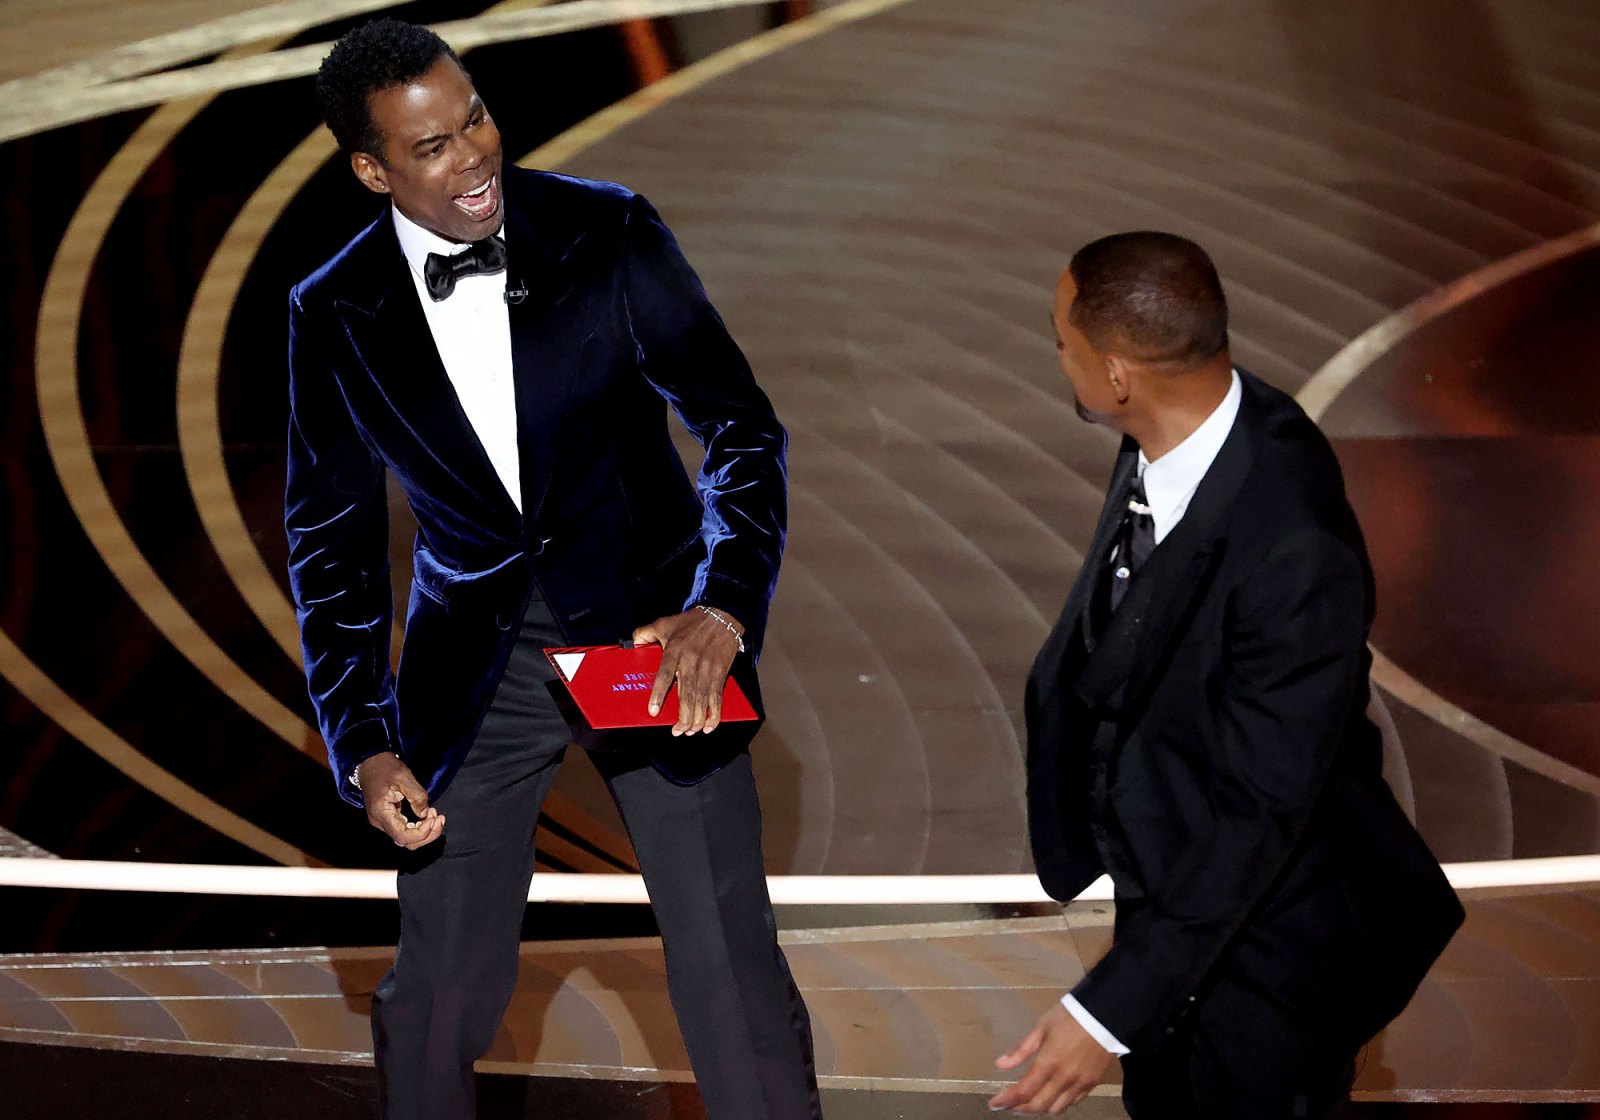 Will Smith and Chris Rock's 2022 Oscars Incident Over Jada Pinkett Smith: Everything to Know